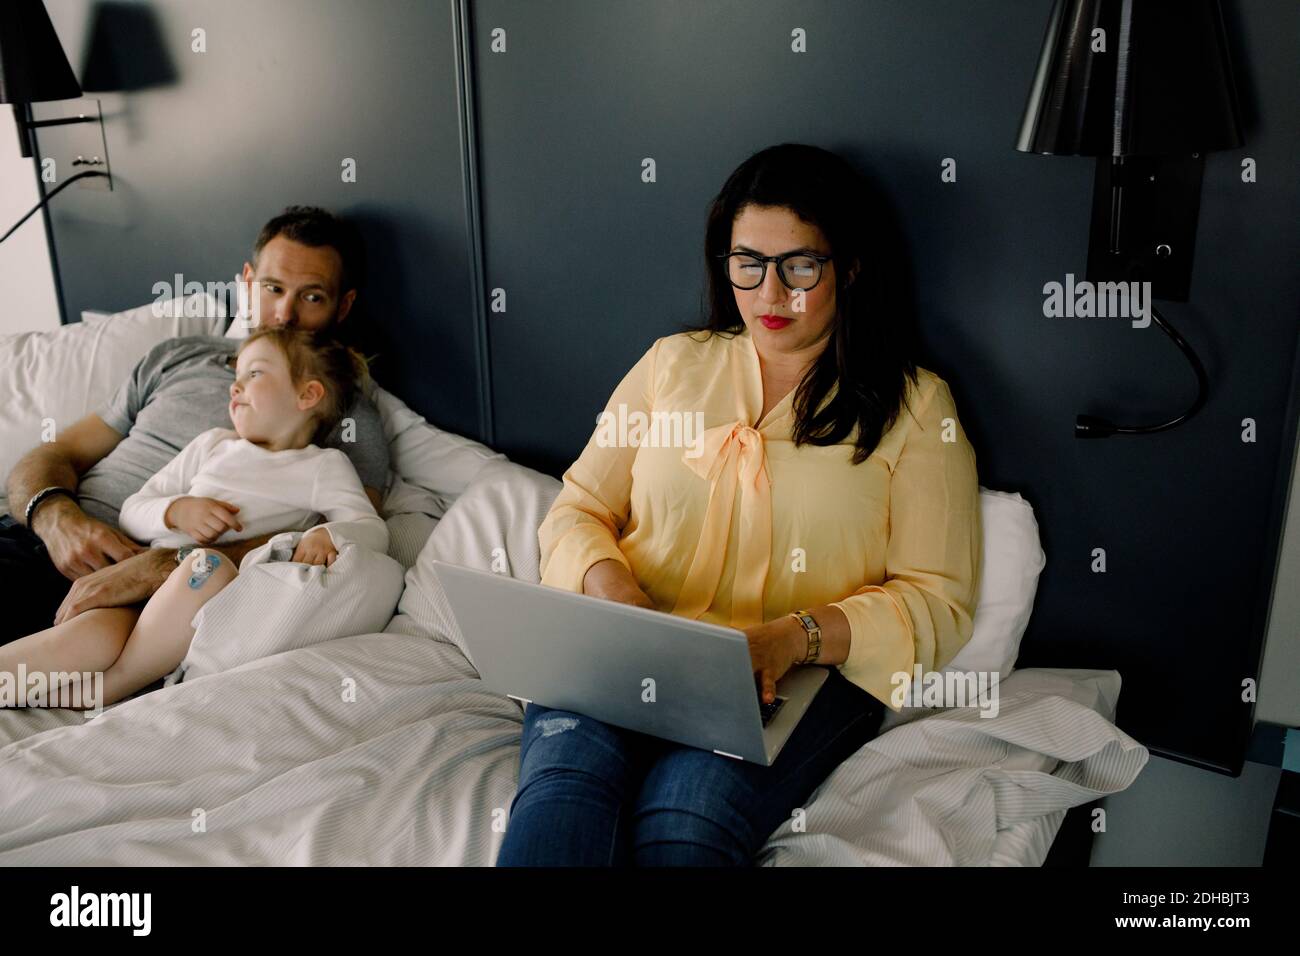 High angle view of woman using laptop while sitting by man and daughter on bed Stock Photo